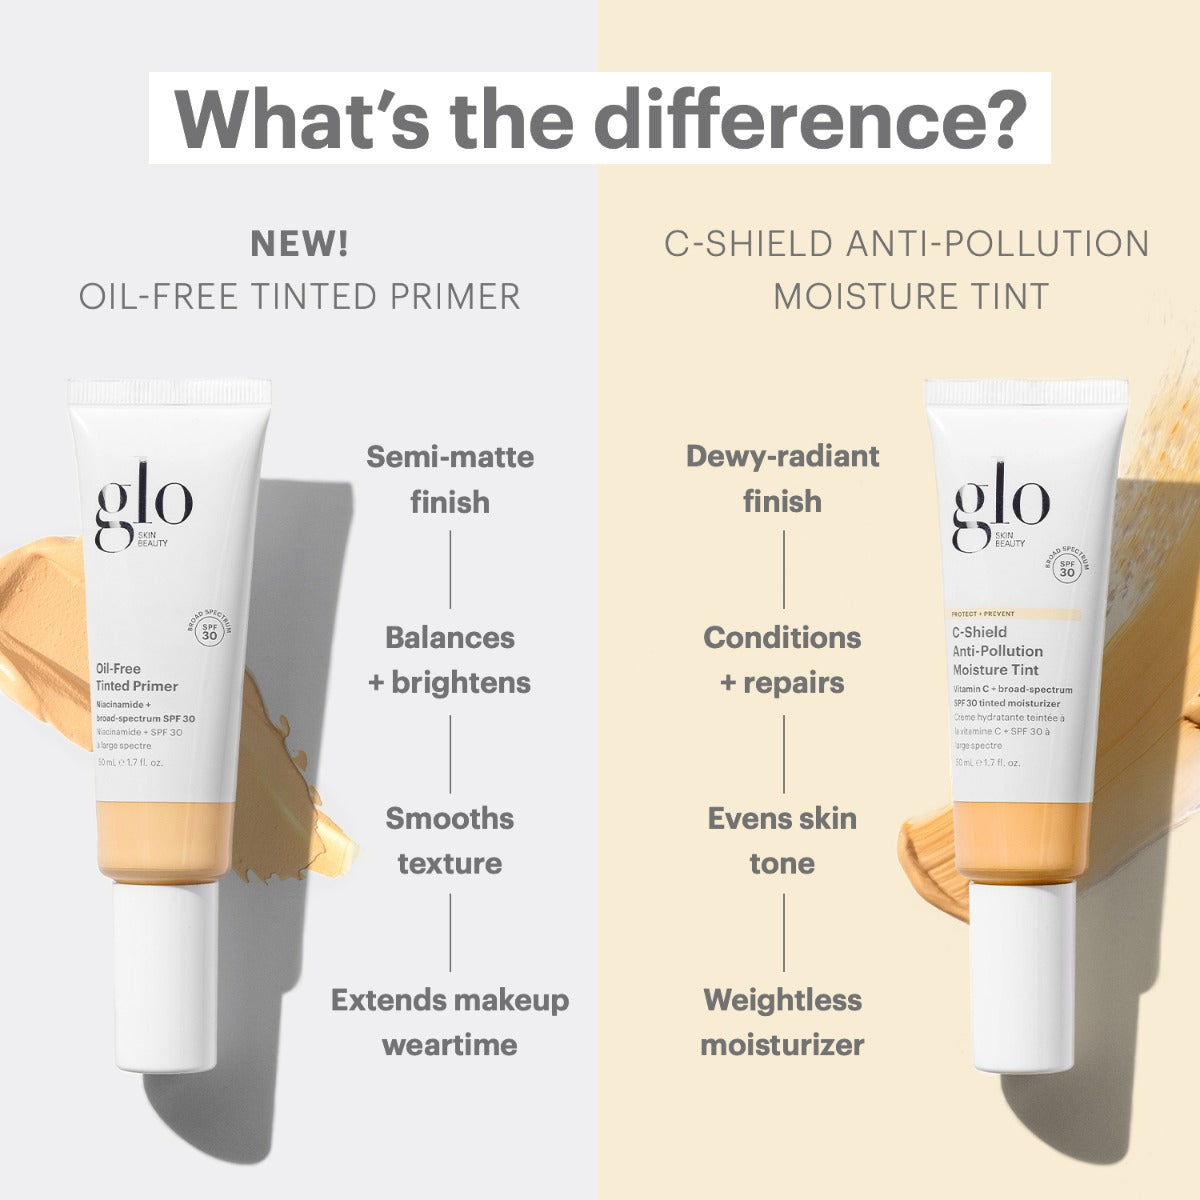 Does Primer Really Make a Difference?